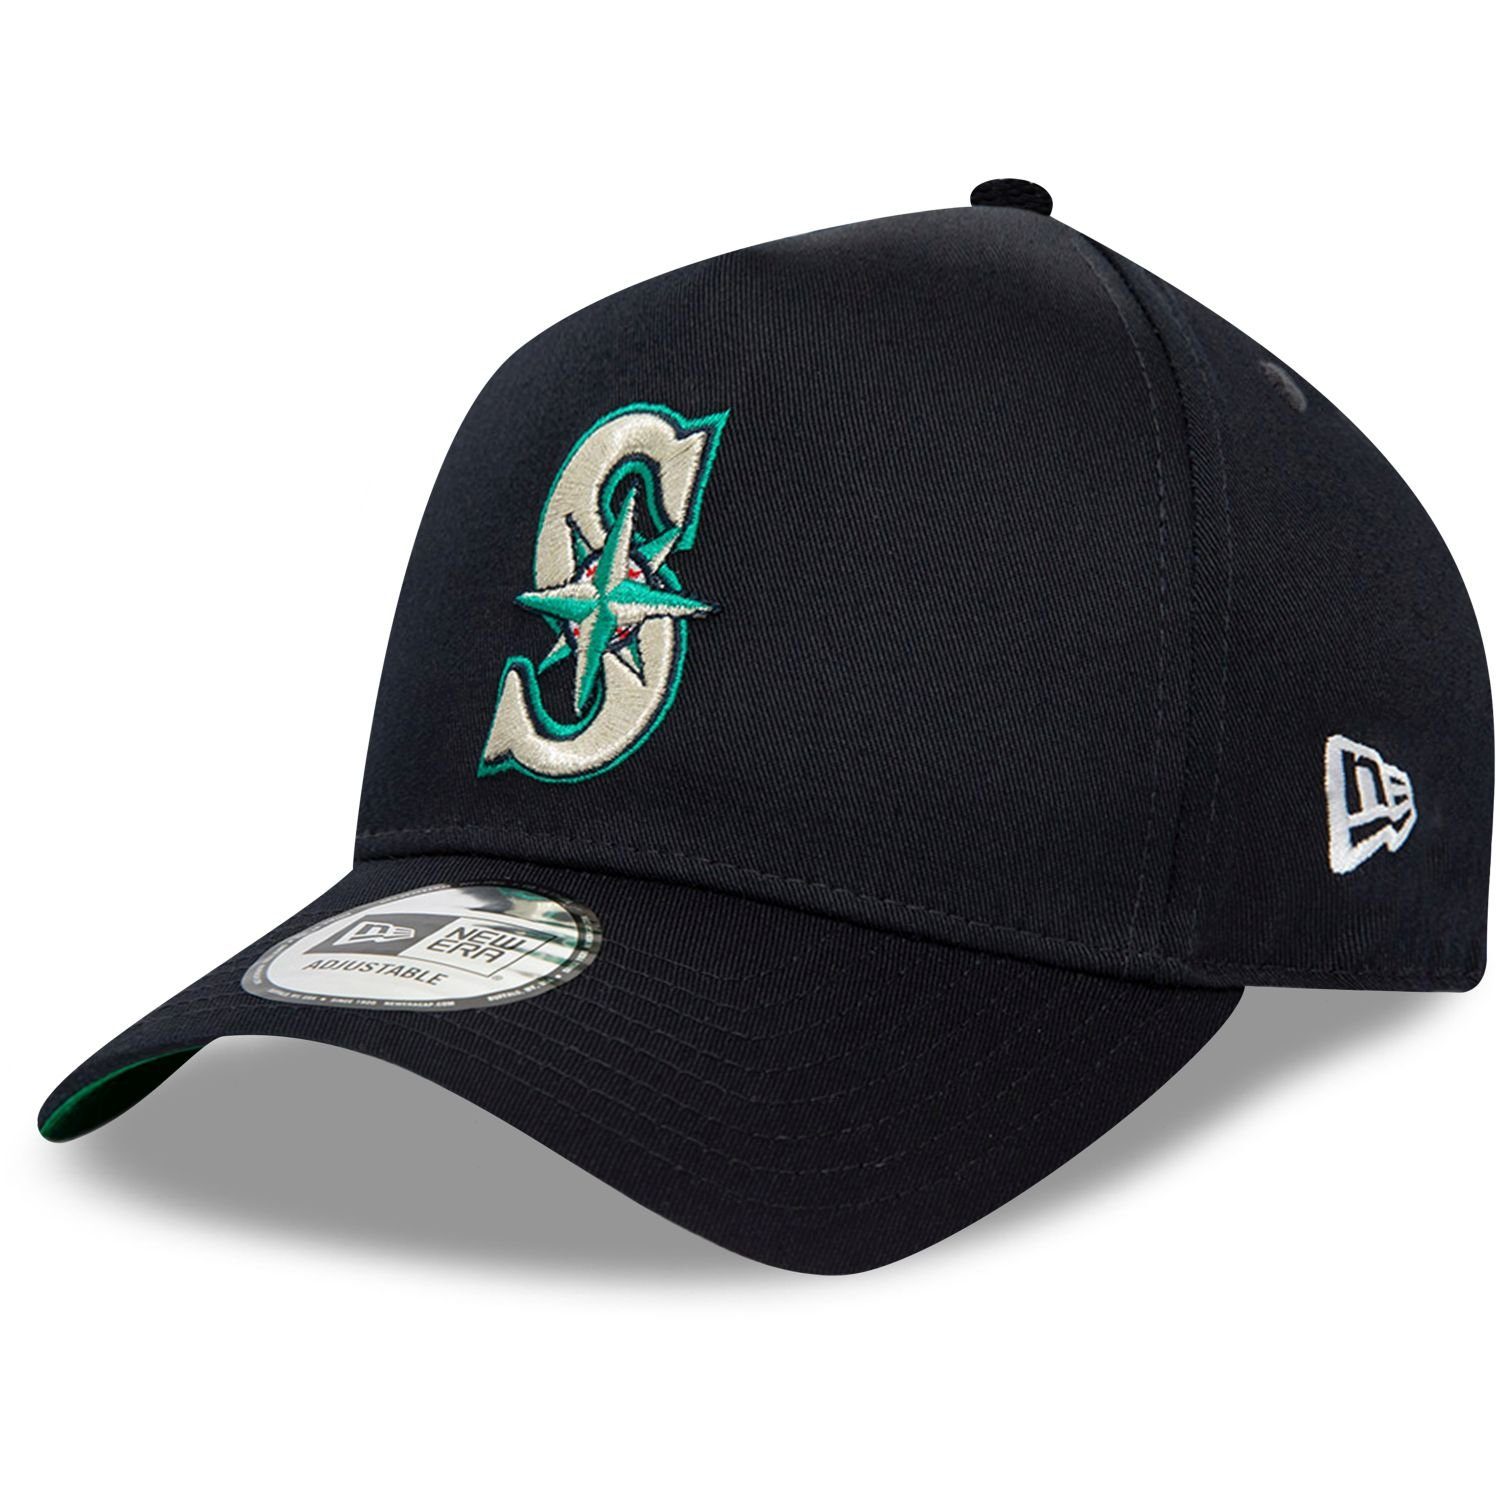 PATCH EFrame Baseball Mariners Era Seattle Cap New Snap 9Forty